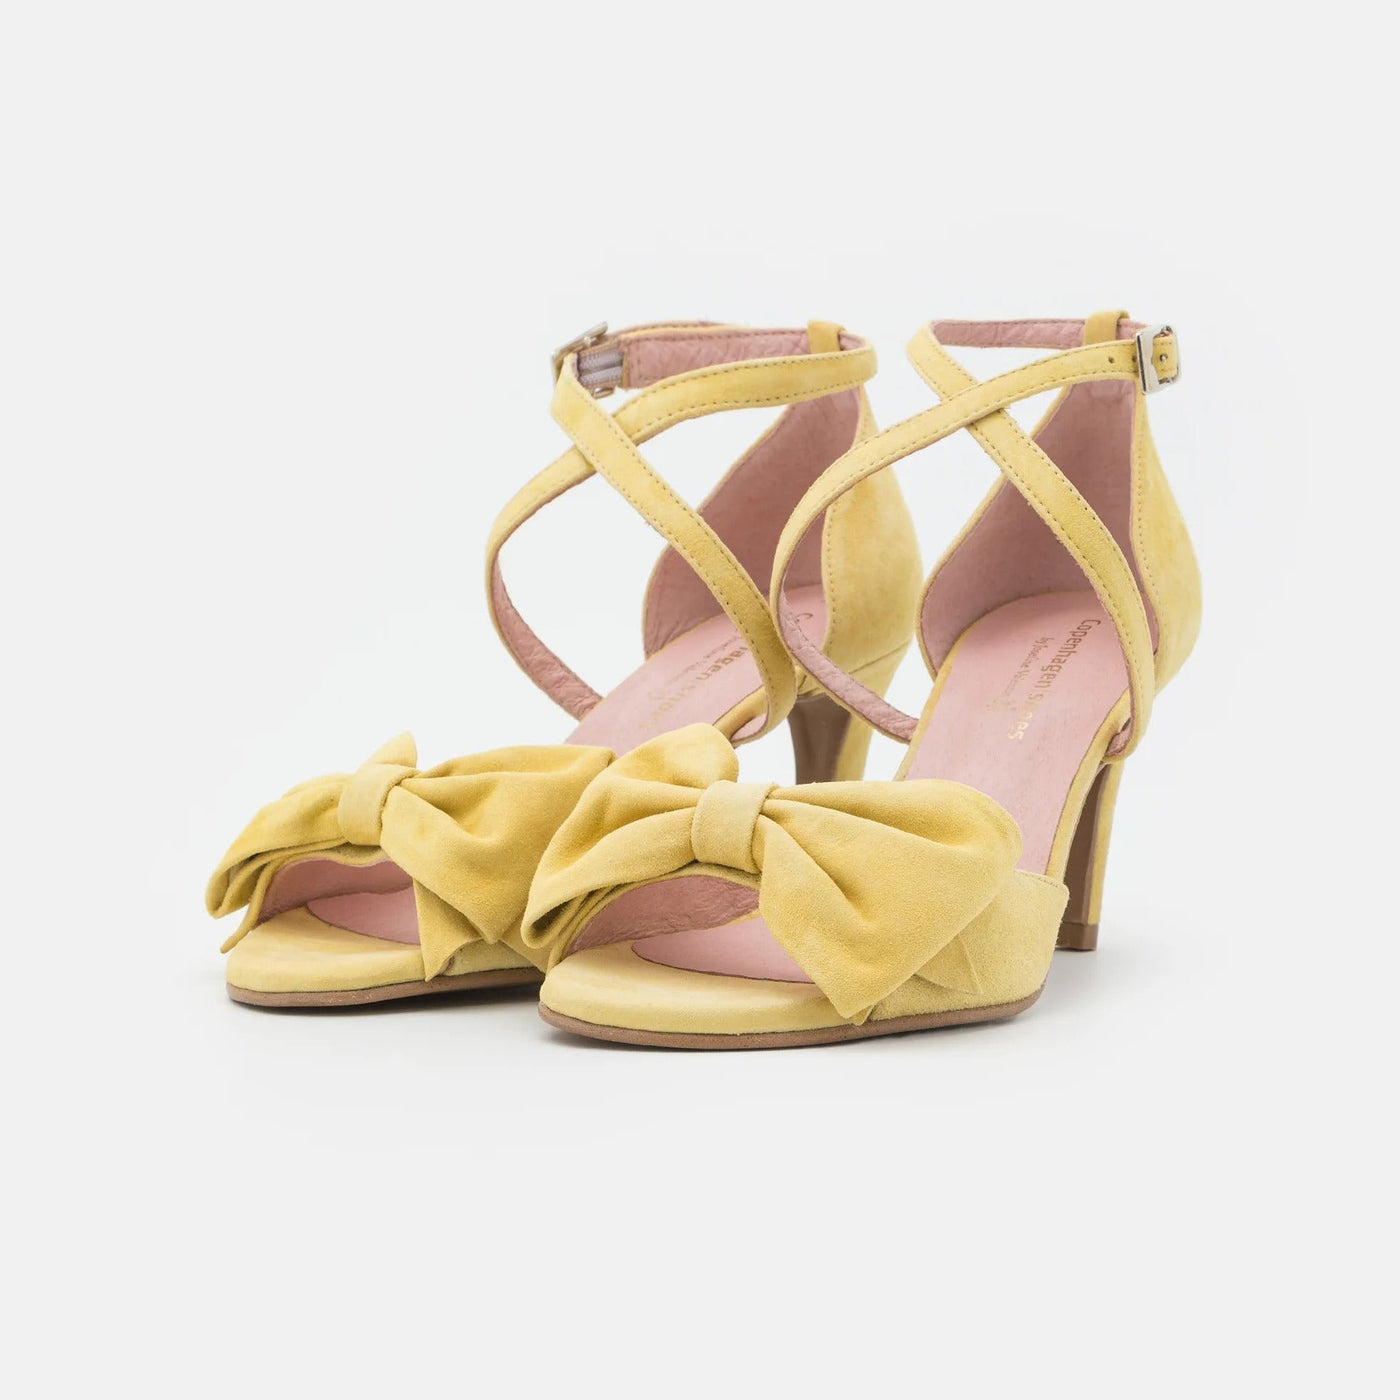 Gotstyle Fashion - Copenhagen Shoes Shoes Suede Stiletto Sandal with Bow - Yellow